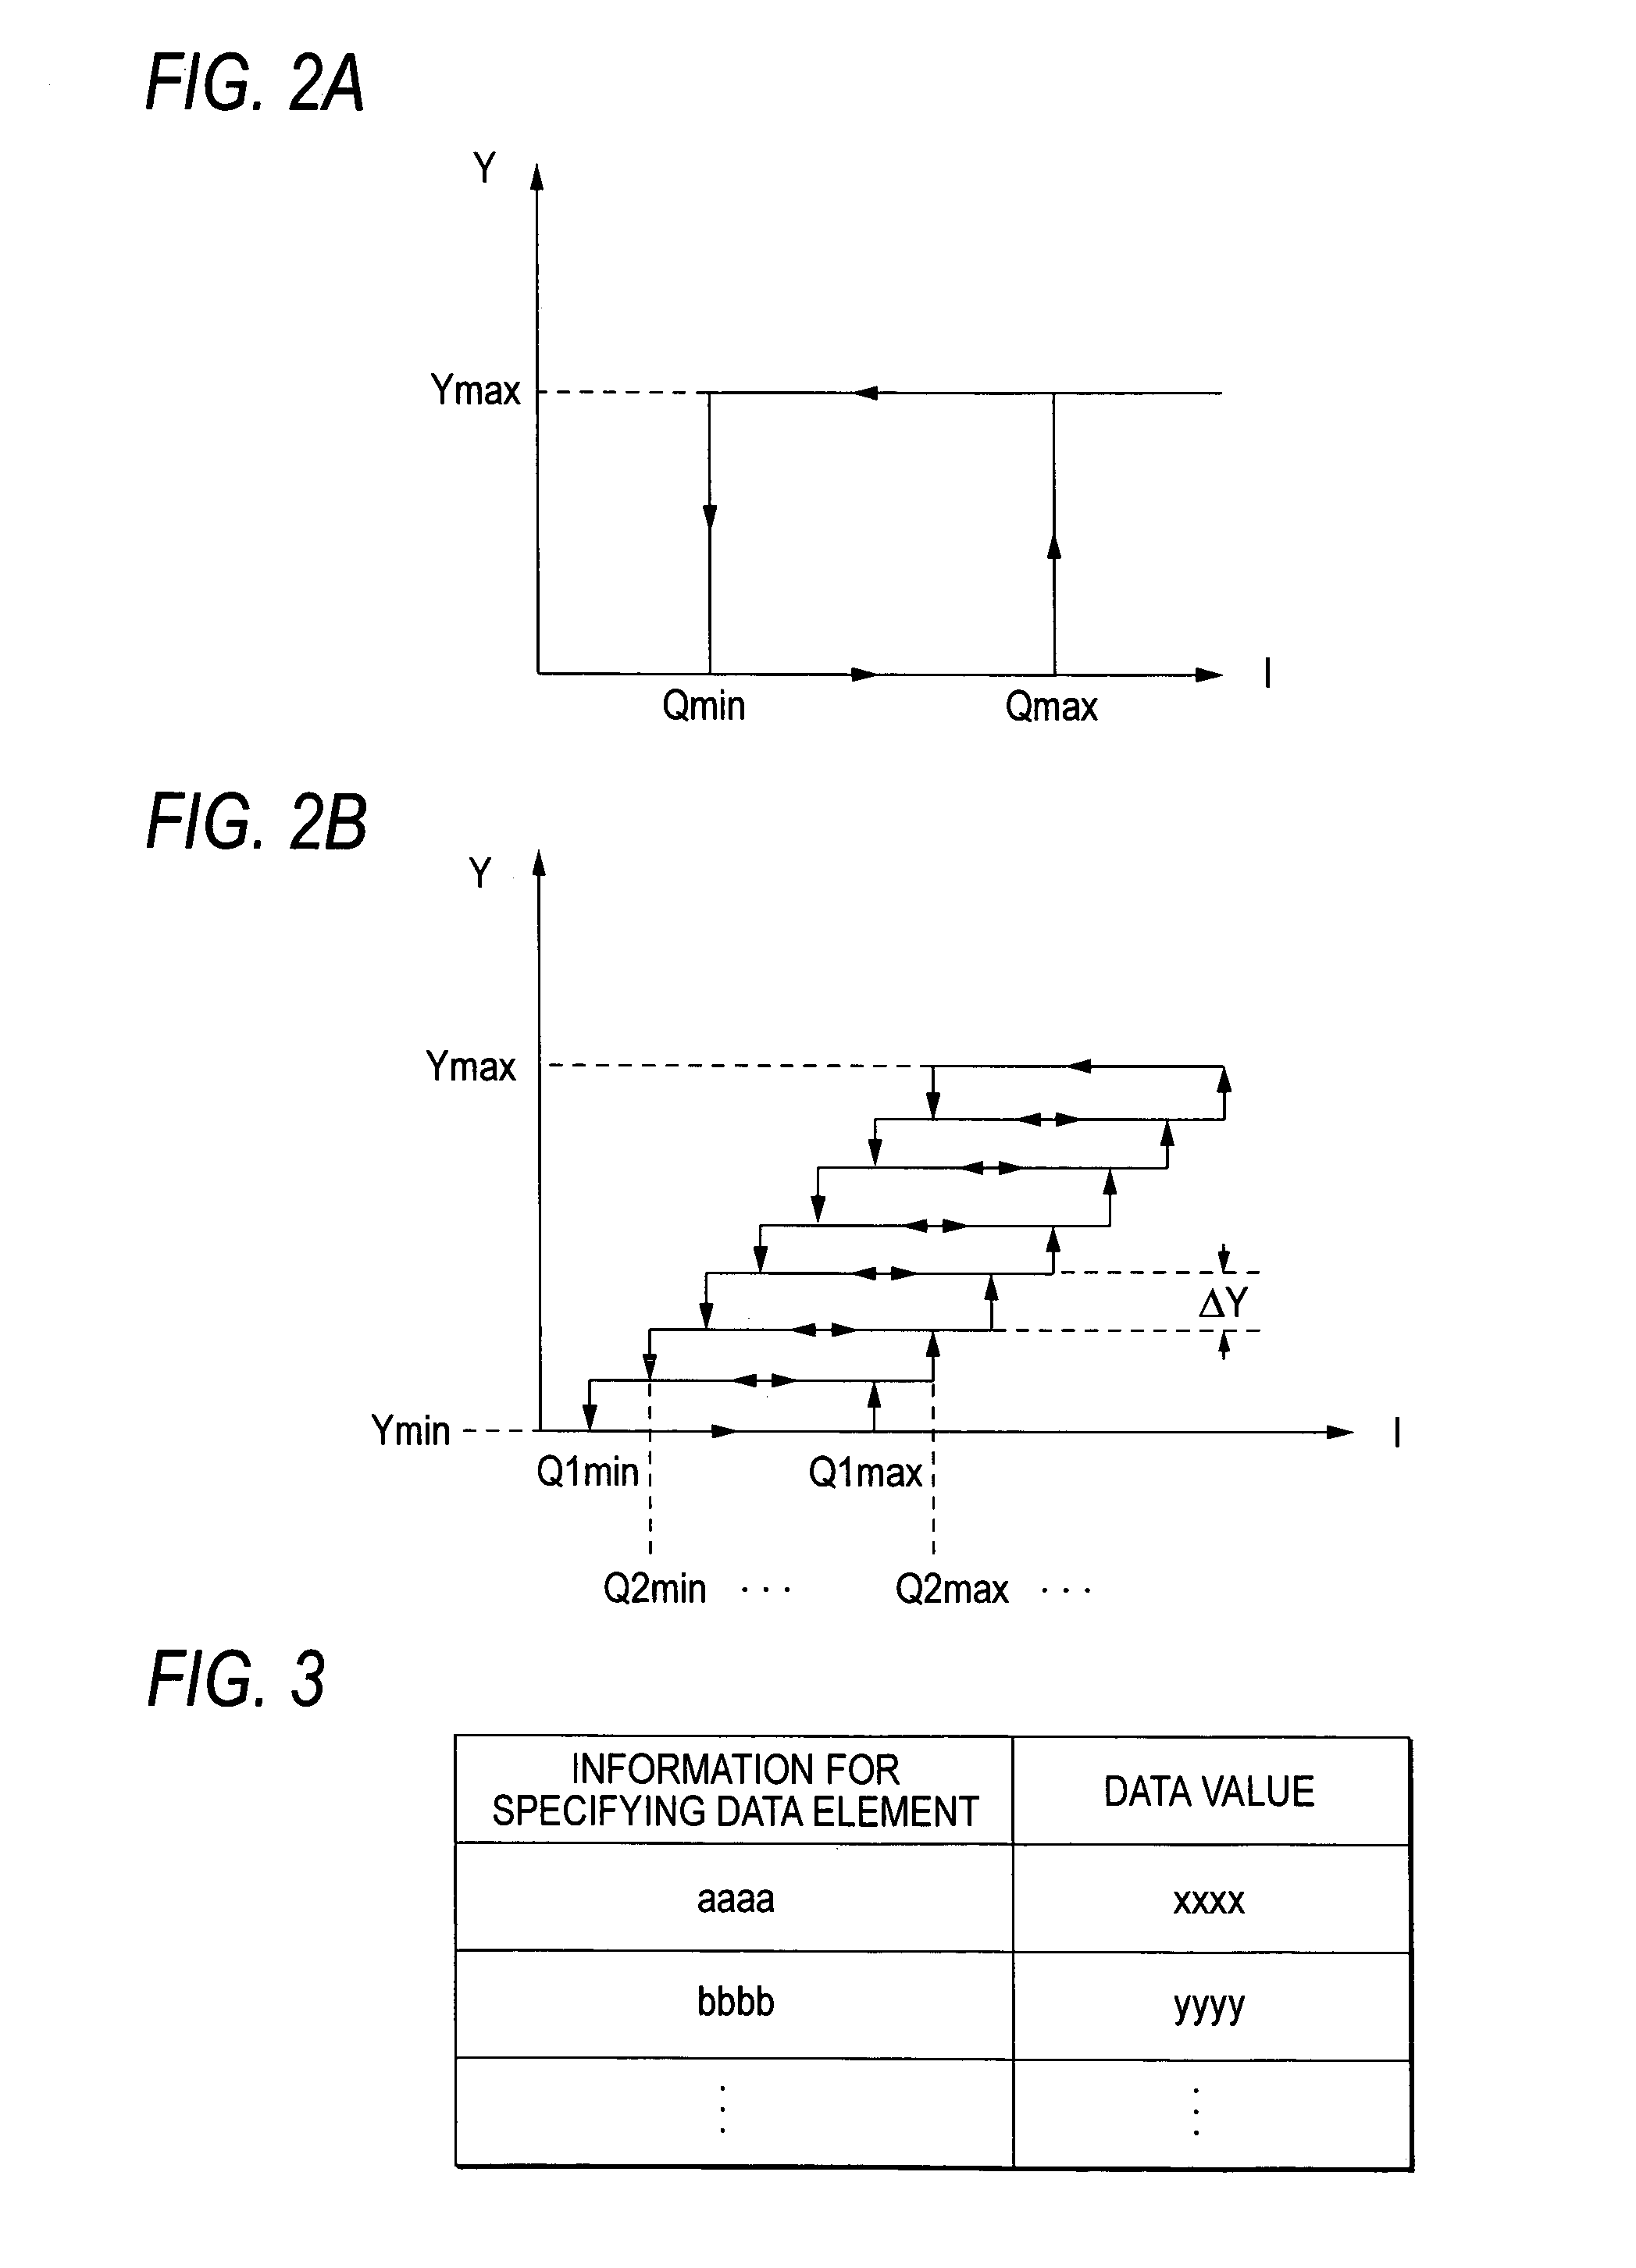 Data analyzer utilizing the spreading activation theory for stemming processing